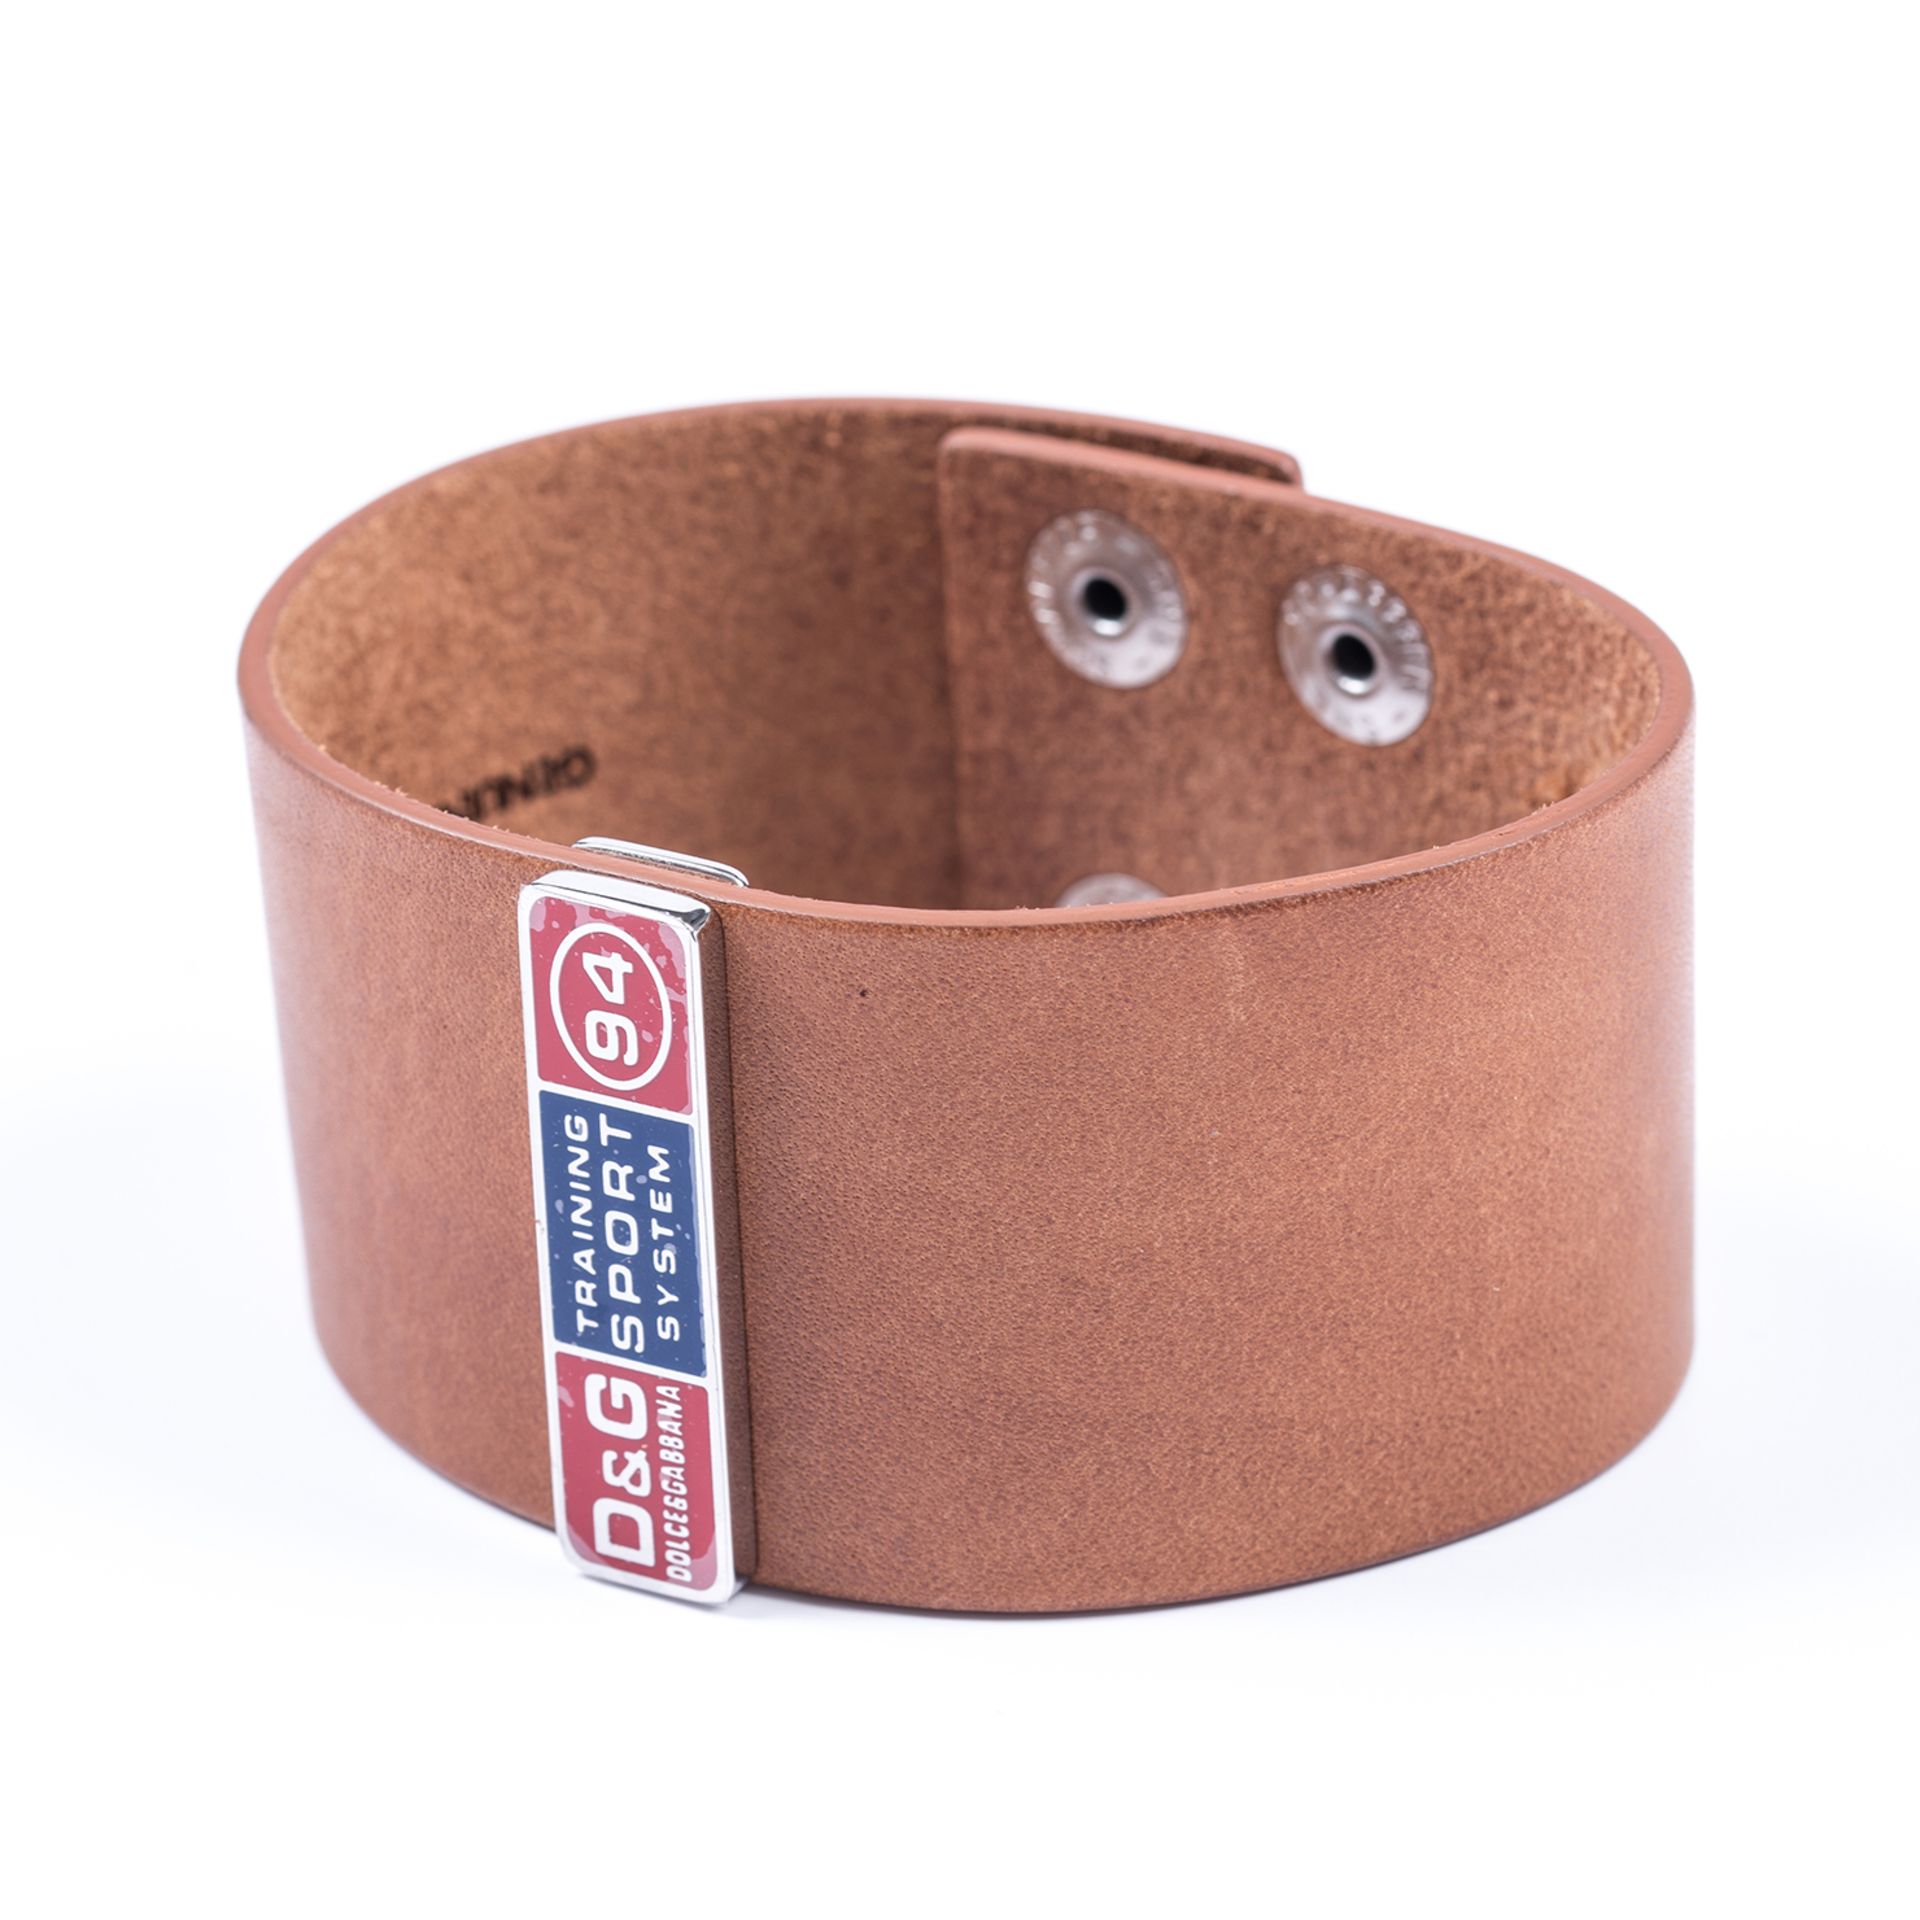 D&G wristband made from dark brown leather.- RRP £89 - Brand New & Boxed - Image 3 of 3